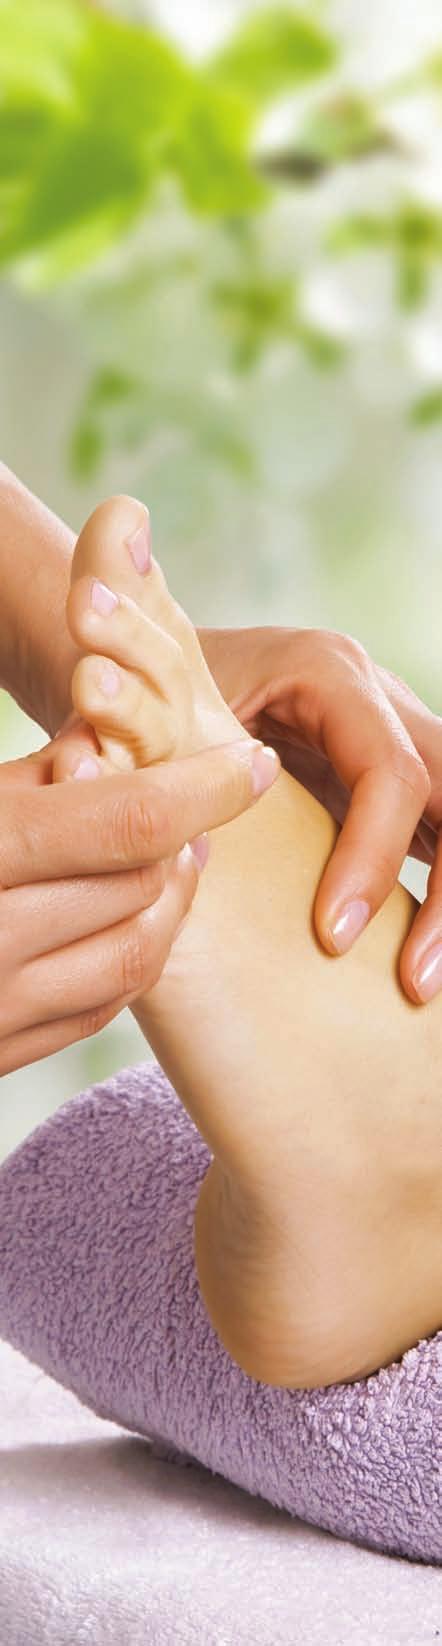 The Importance of Massage Treatments These body spa rituals gain more and more importance as our contemporary urban lives become more hectic, isolating, stressed and environmentally polluted.